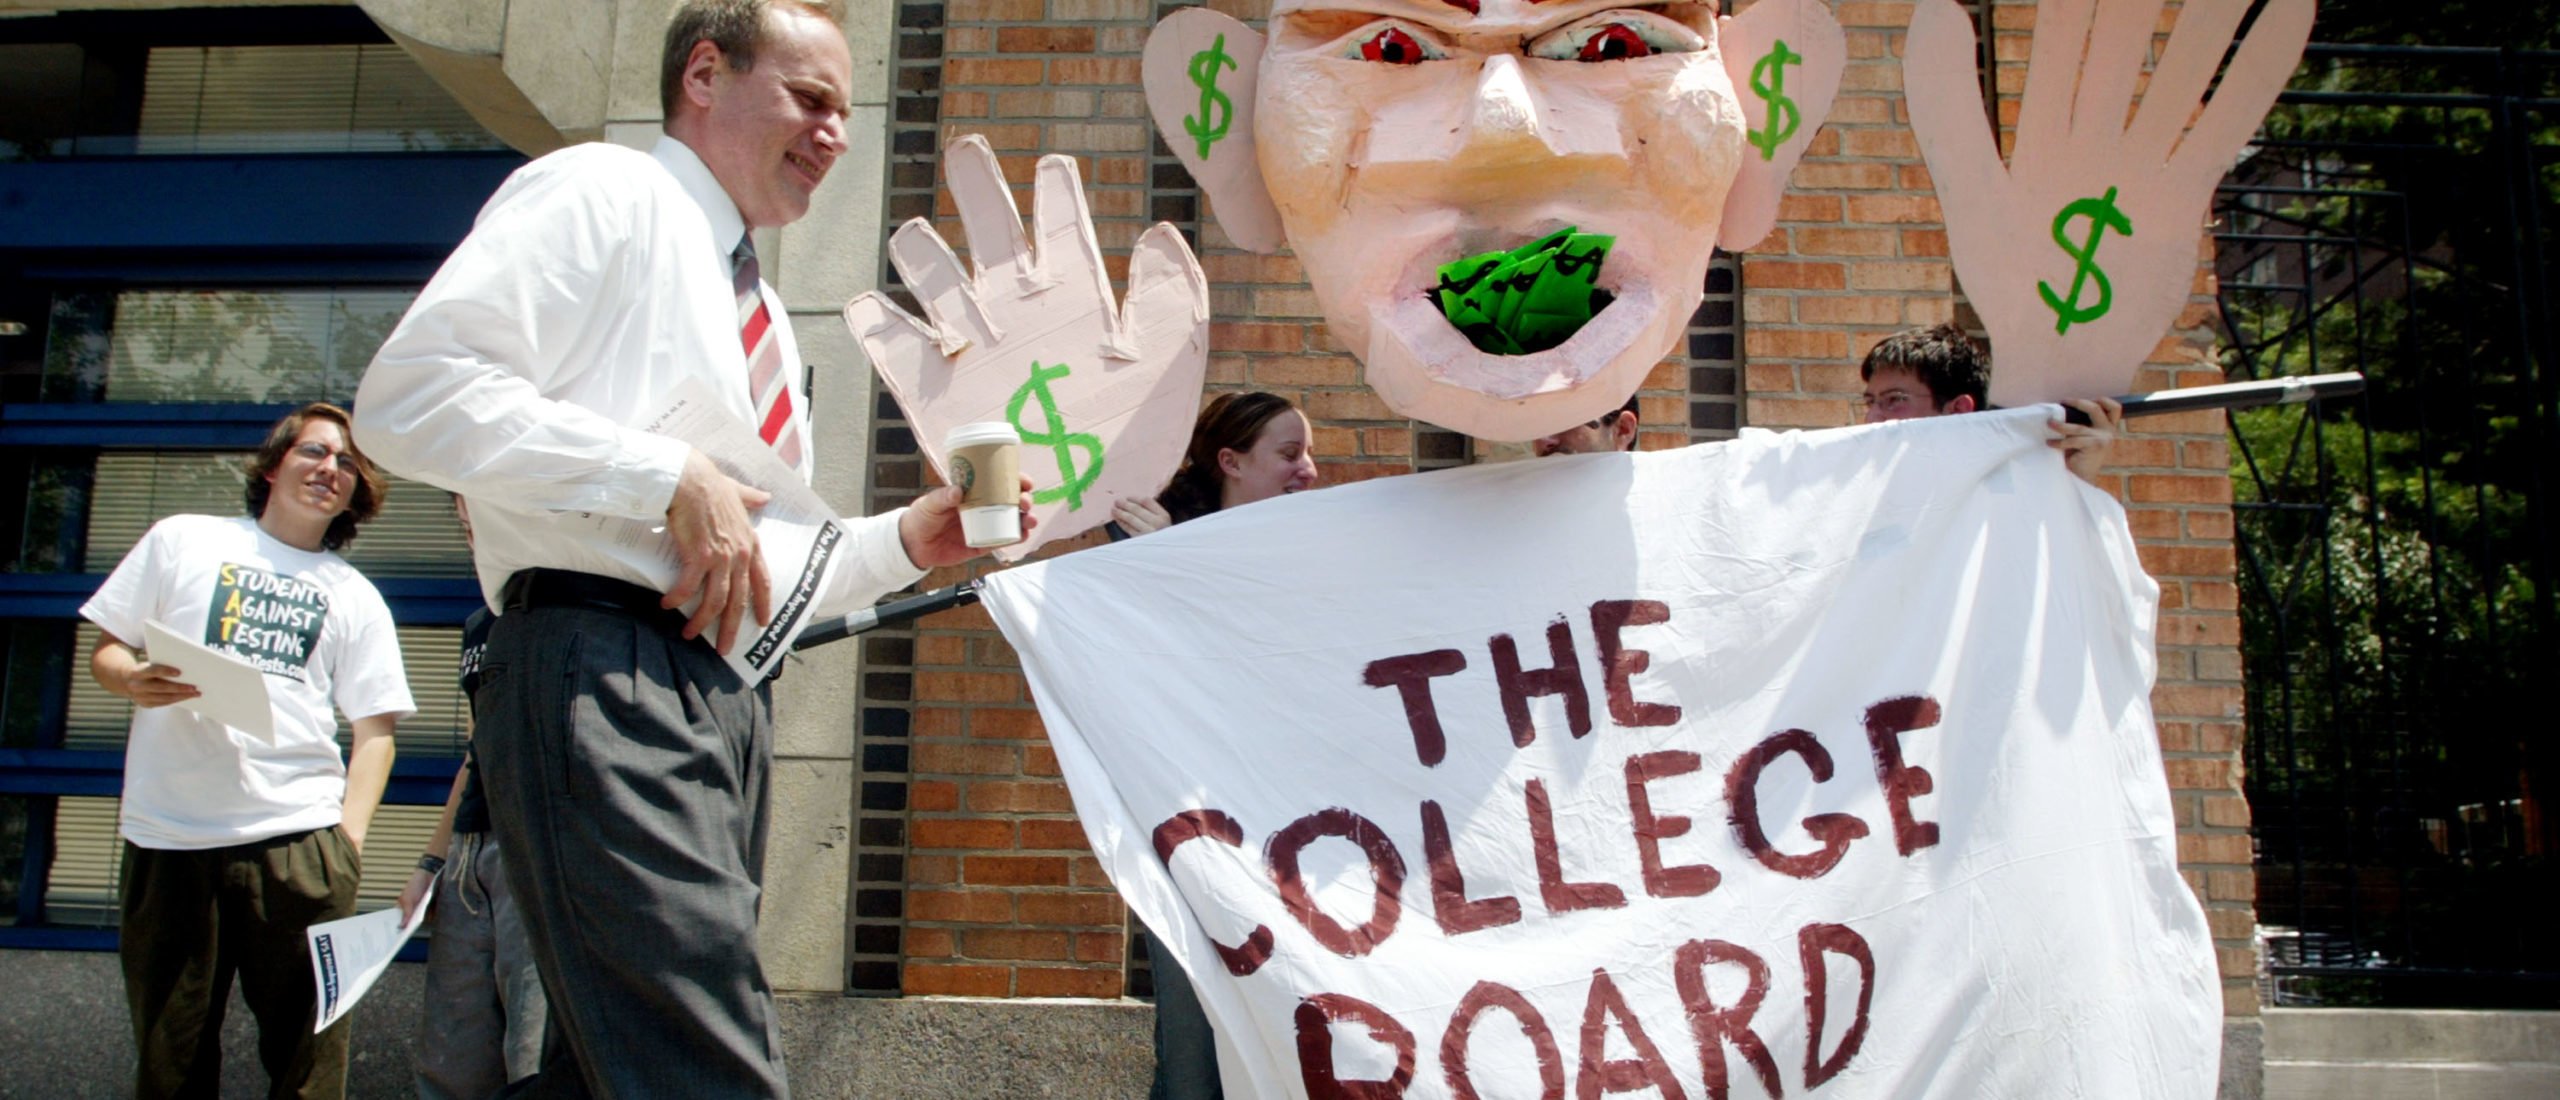 NEW YORK - JUNE 27: Students protest SAT testing outside College Board headquarters June 27, 2002 in New York City. College Board trustees decided June 27 to add a written essay and other changes to the SAT in an overhaul of the college entrance exam. (Photo by Mario Tama/Getty Images)